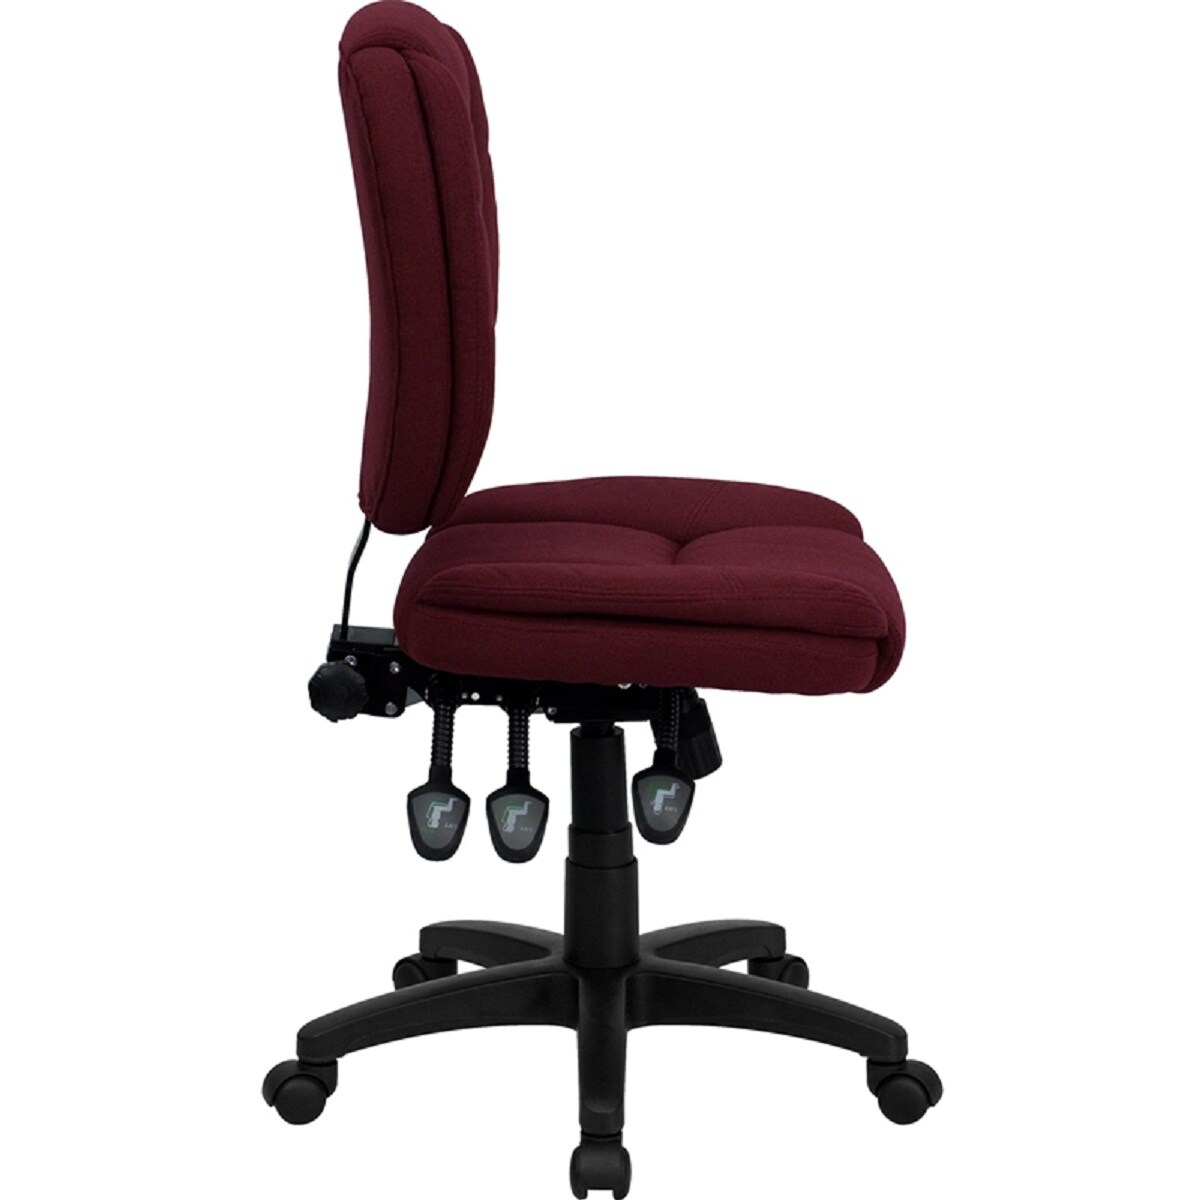 https://ak1.ostkcdn.com/images/products/is/images/direct/9b62aa33dce5ace52ba19f89be459eda30eb6c20/41%22-Mid-Back-Burgundy-Fabric-Multifunction-Swivel-Ergonomic-Task-Office-Chair-with-Pillow-Top.jpg